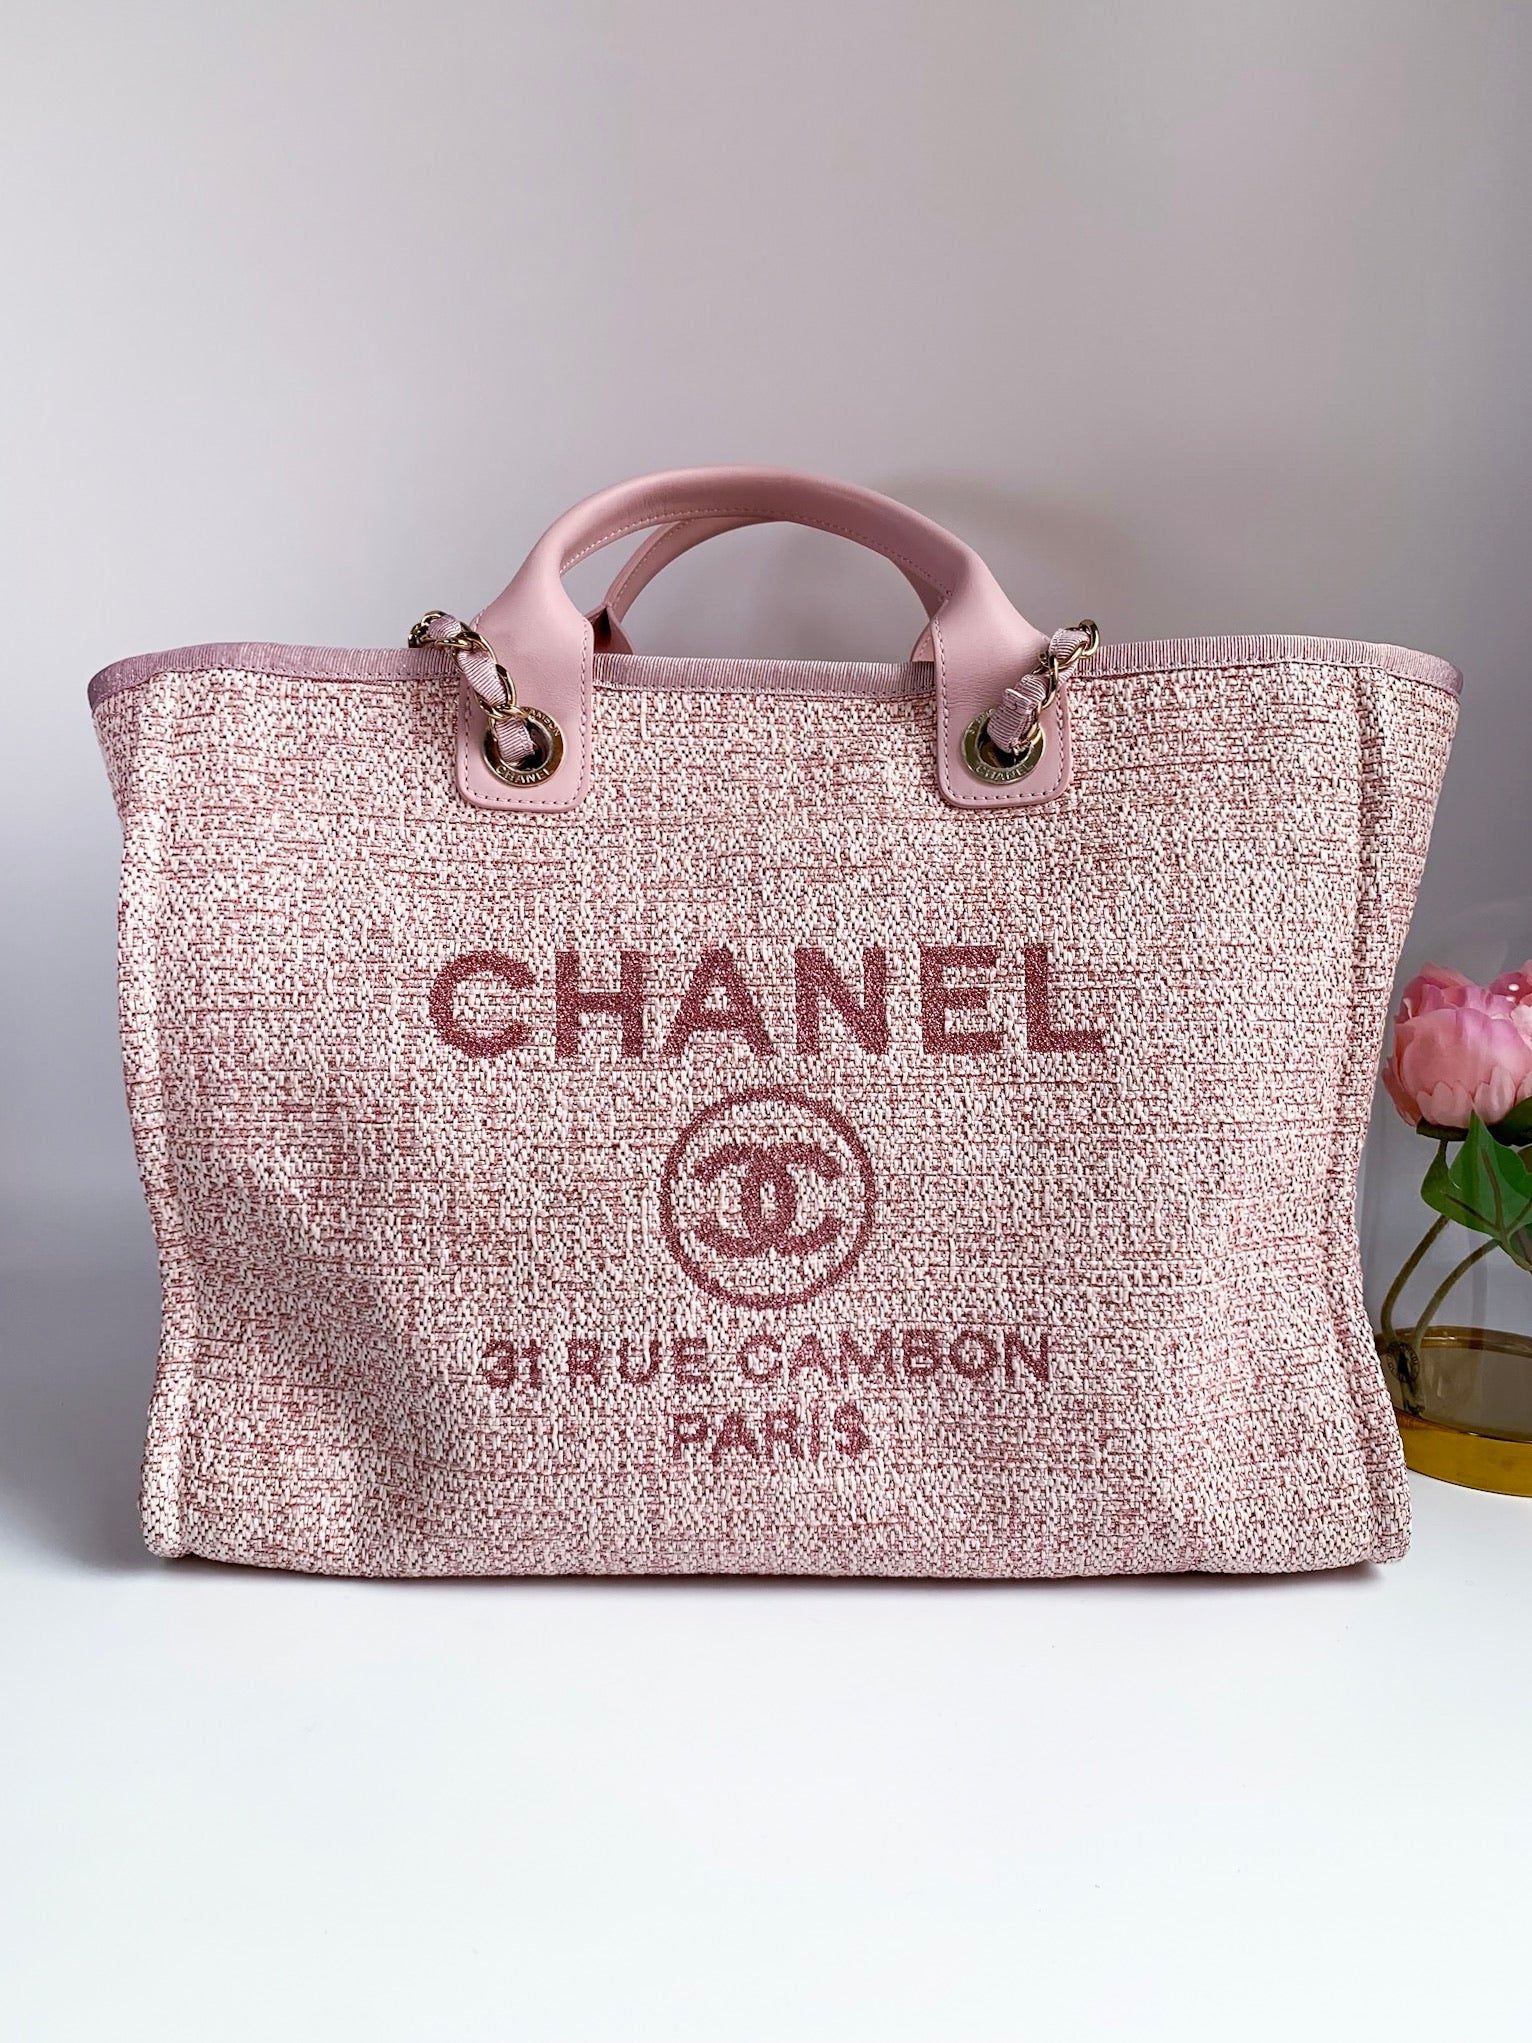 pink chanel deauville tote